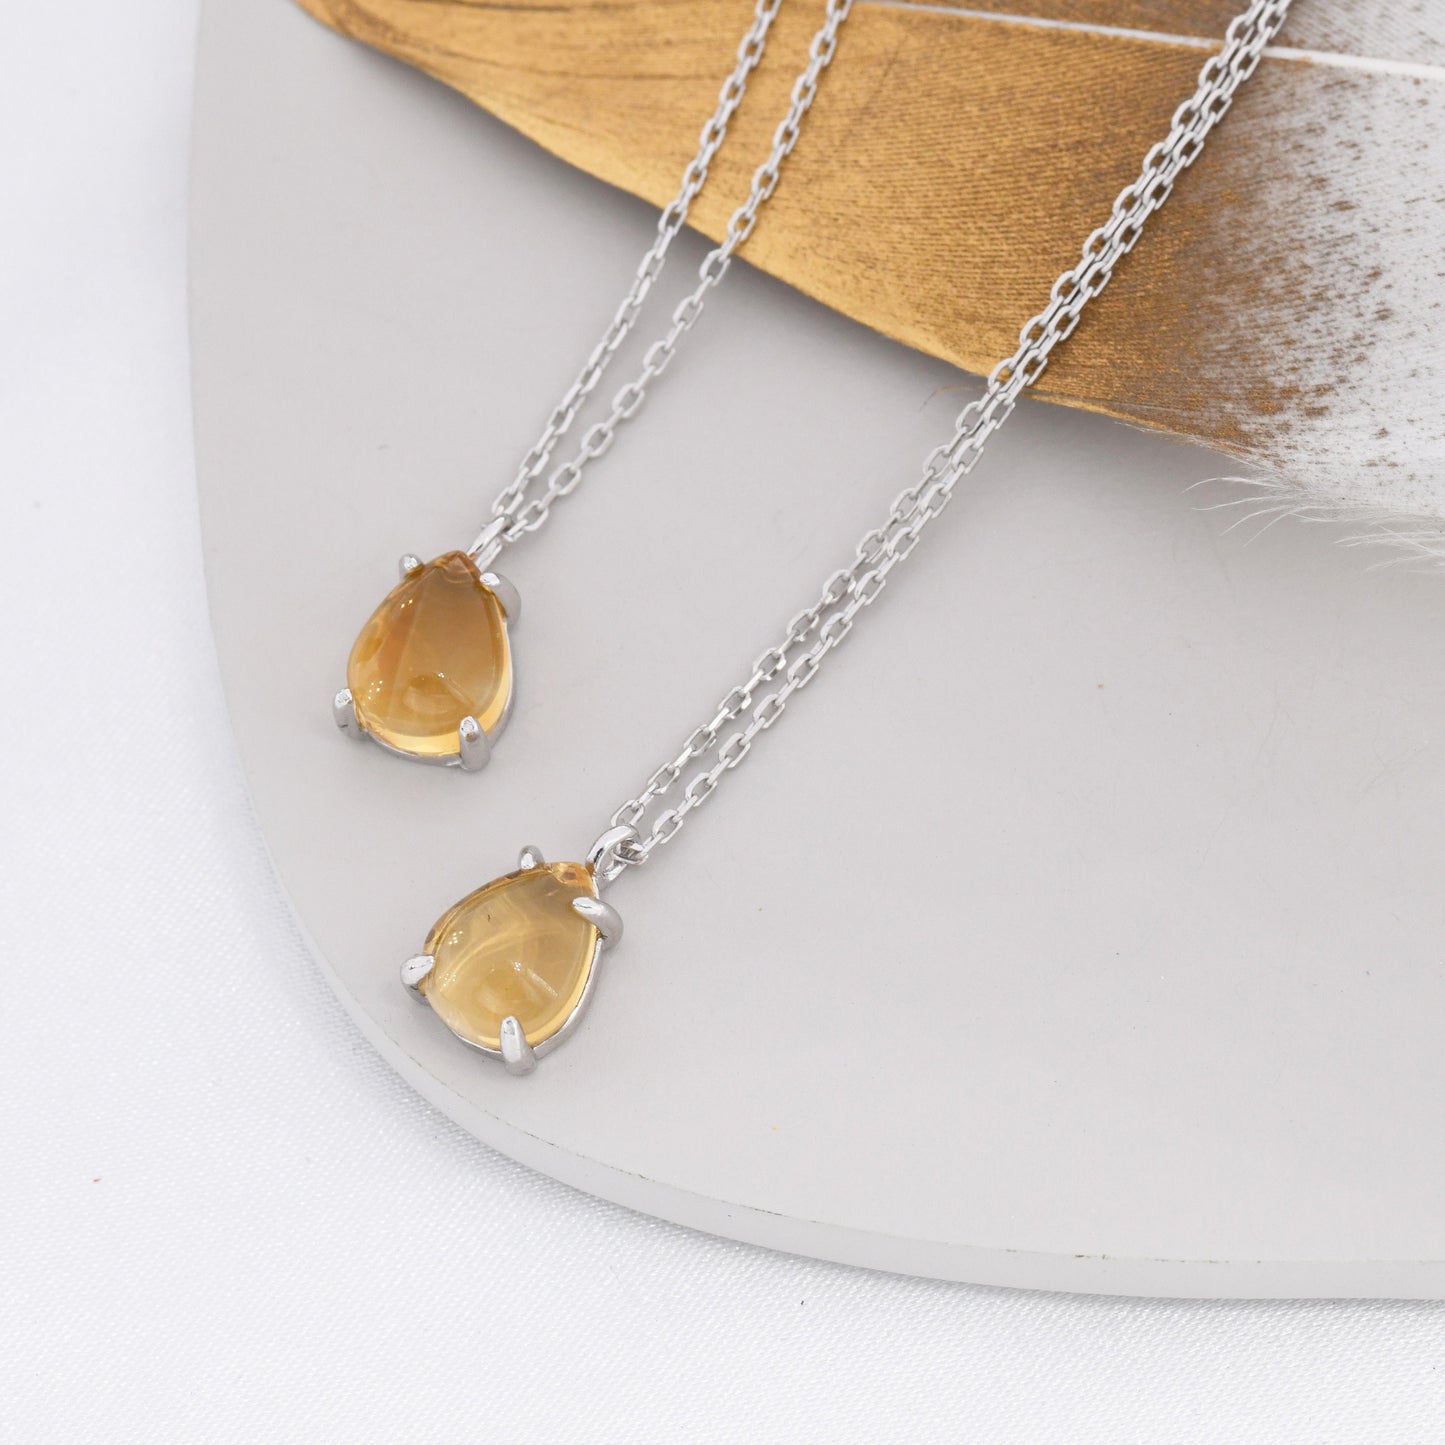 Genuine Citrine Crystal Pear Necklace in Sterling Silver, Droplet Cabochon Natural Citrine Stone Necklace, November Birthstone